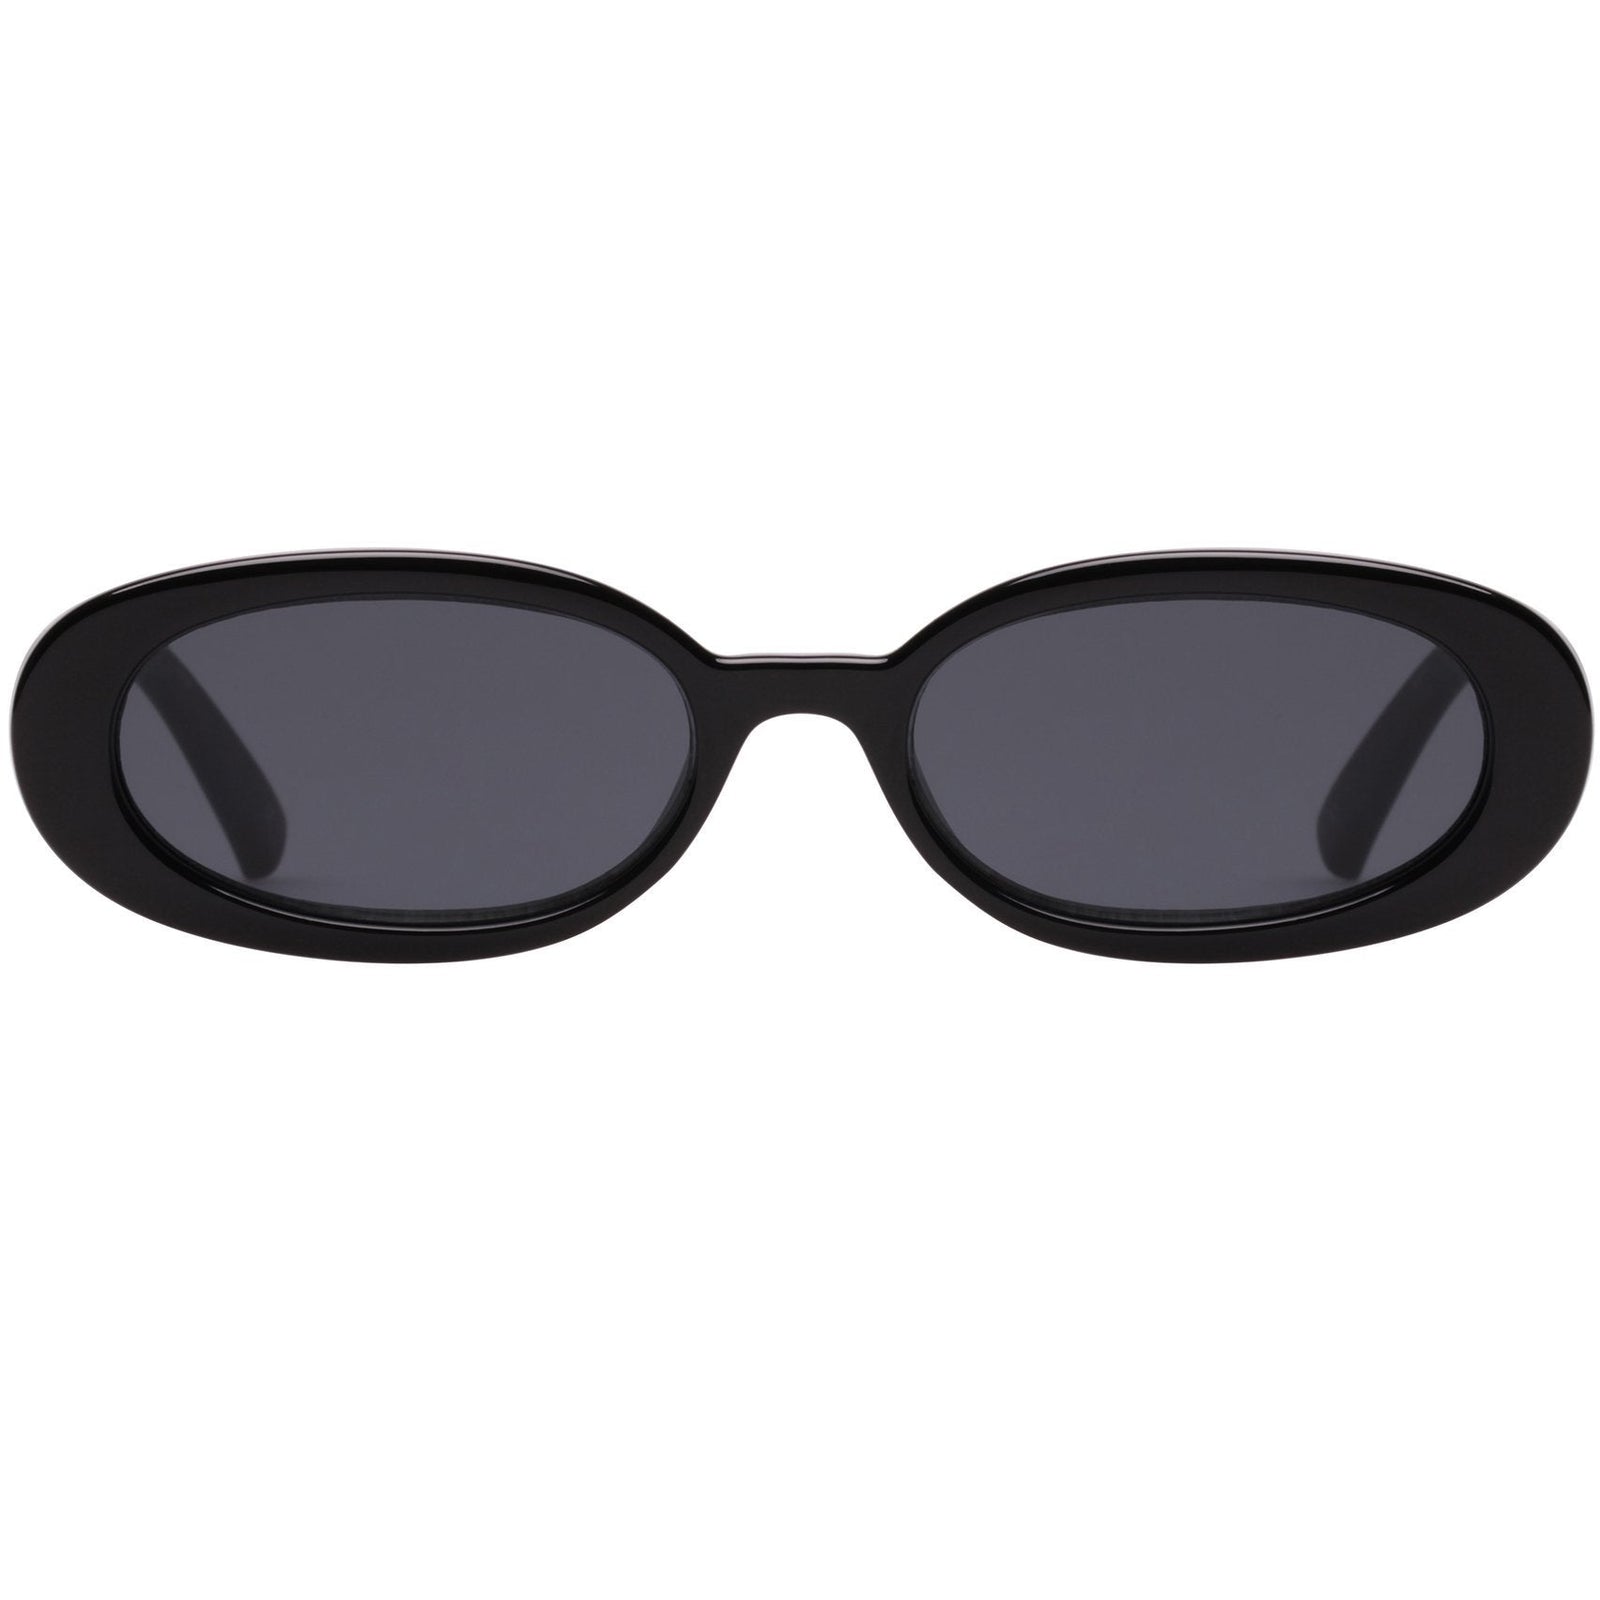 Oval butterfly sunglasses, dark grey | Max&Co.